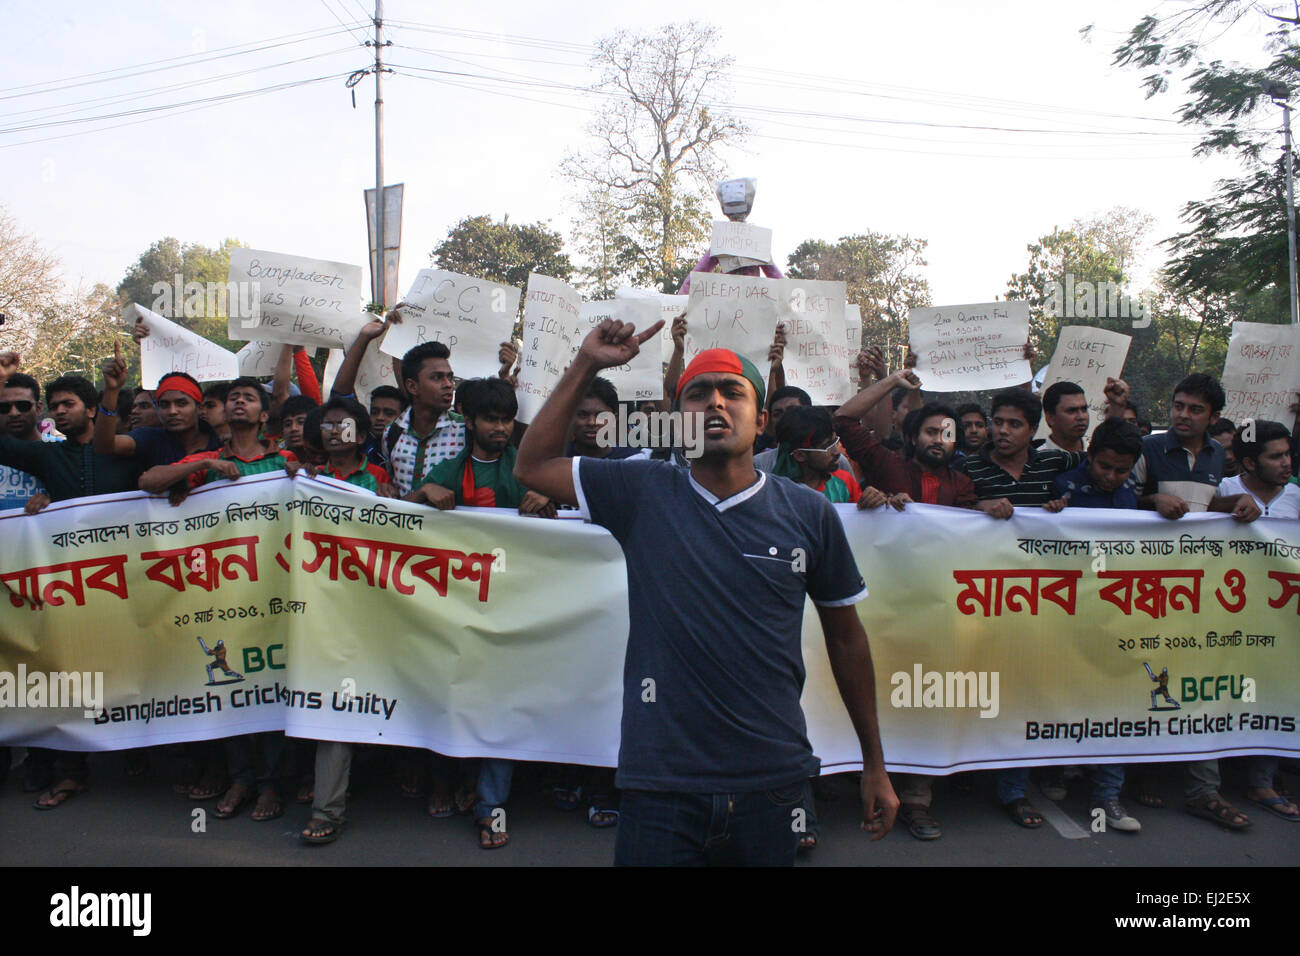 Dhaka, Bangladesh. 20th March, 2015. Bangladesh cricket fans unity activists Protests of an umpire on Dhaka University campus area to protest the umpiring decisions during the second quarter-final match of the ICC World Cup 2015. Dhaka, Bangladesh. Credit:  Mamunur Rashid/Alamy Live News Stock Photo